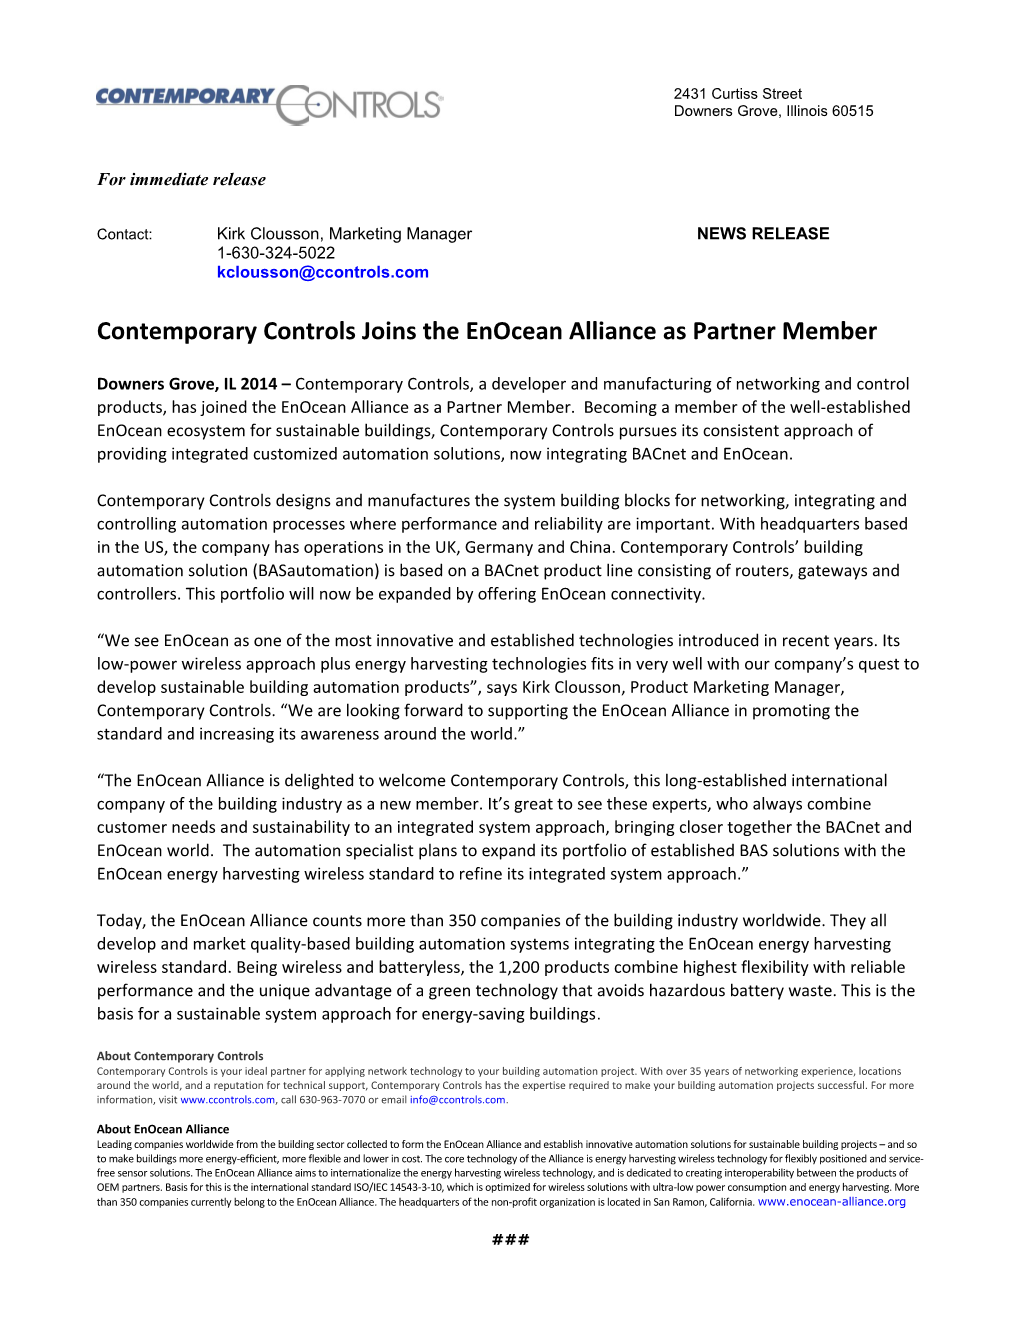 Enocean Alliance Appoints New Business Development Director for North America